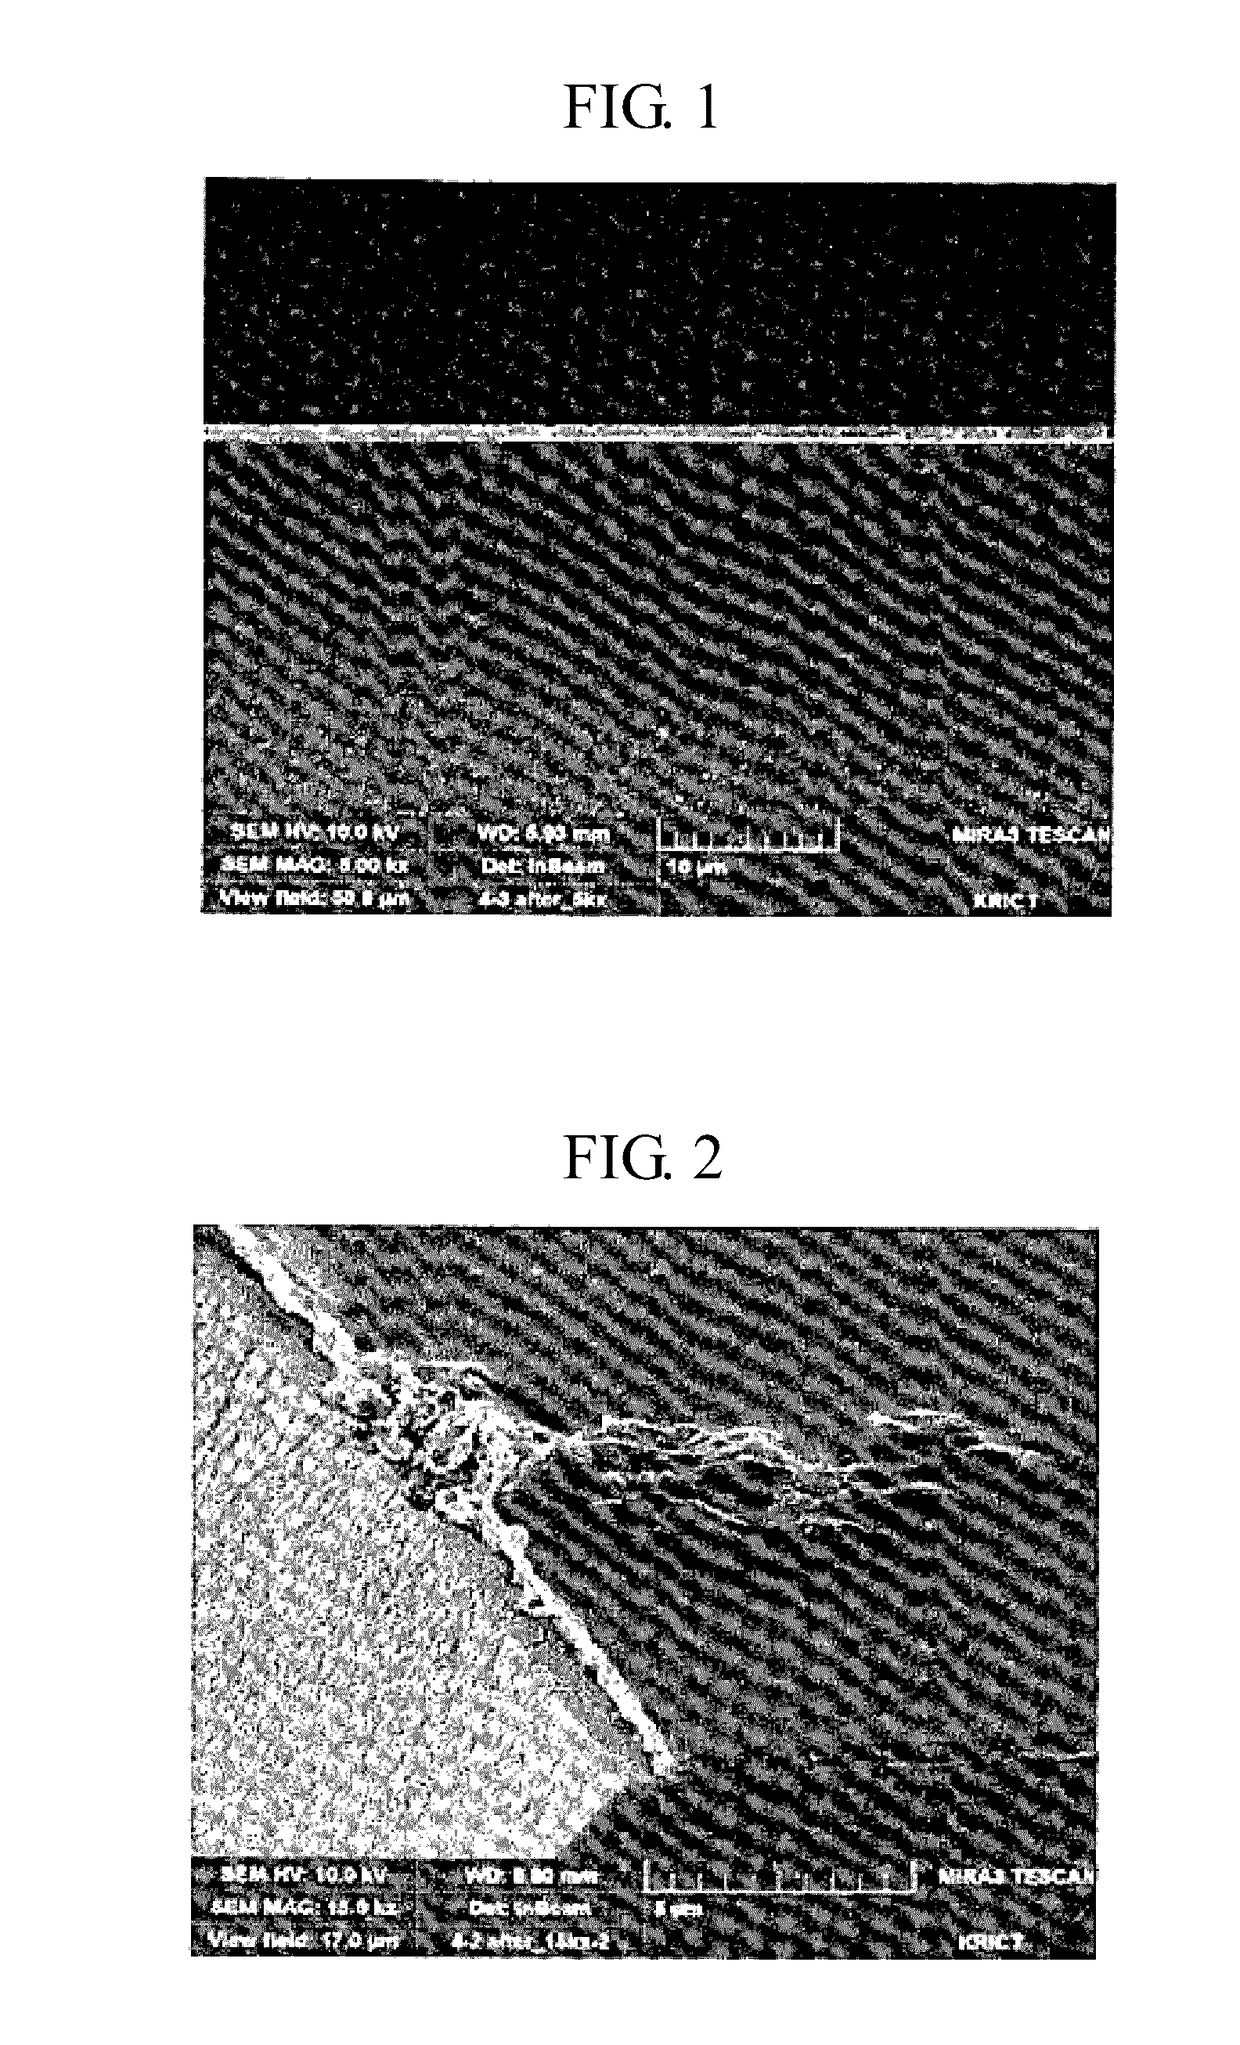 Hydrogel contact lens having wet surface, and manufacturing method therefor